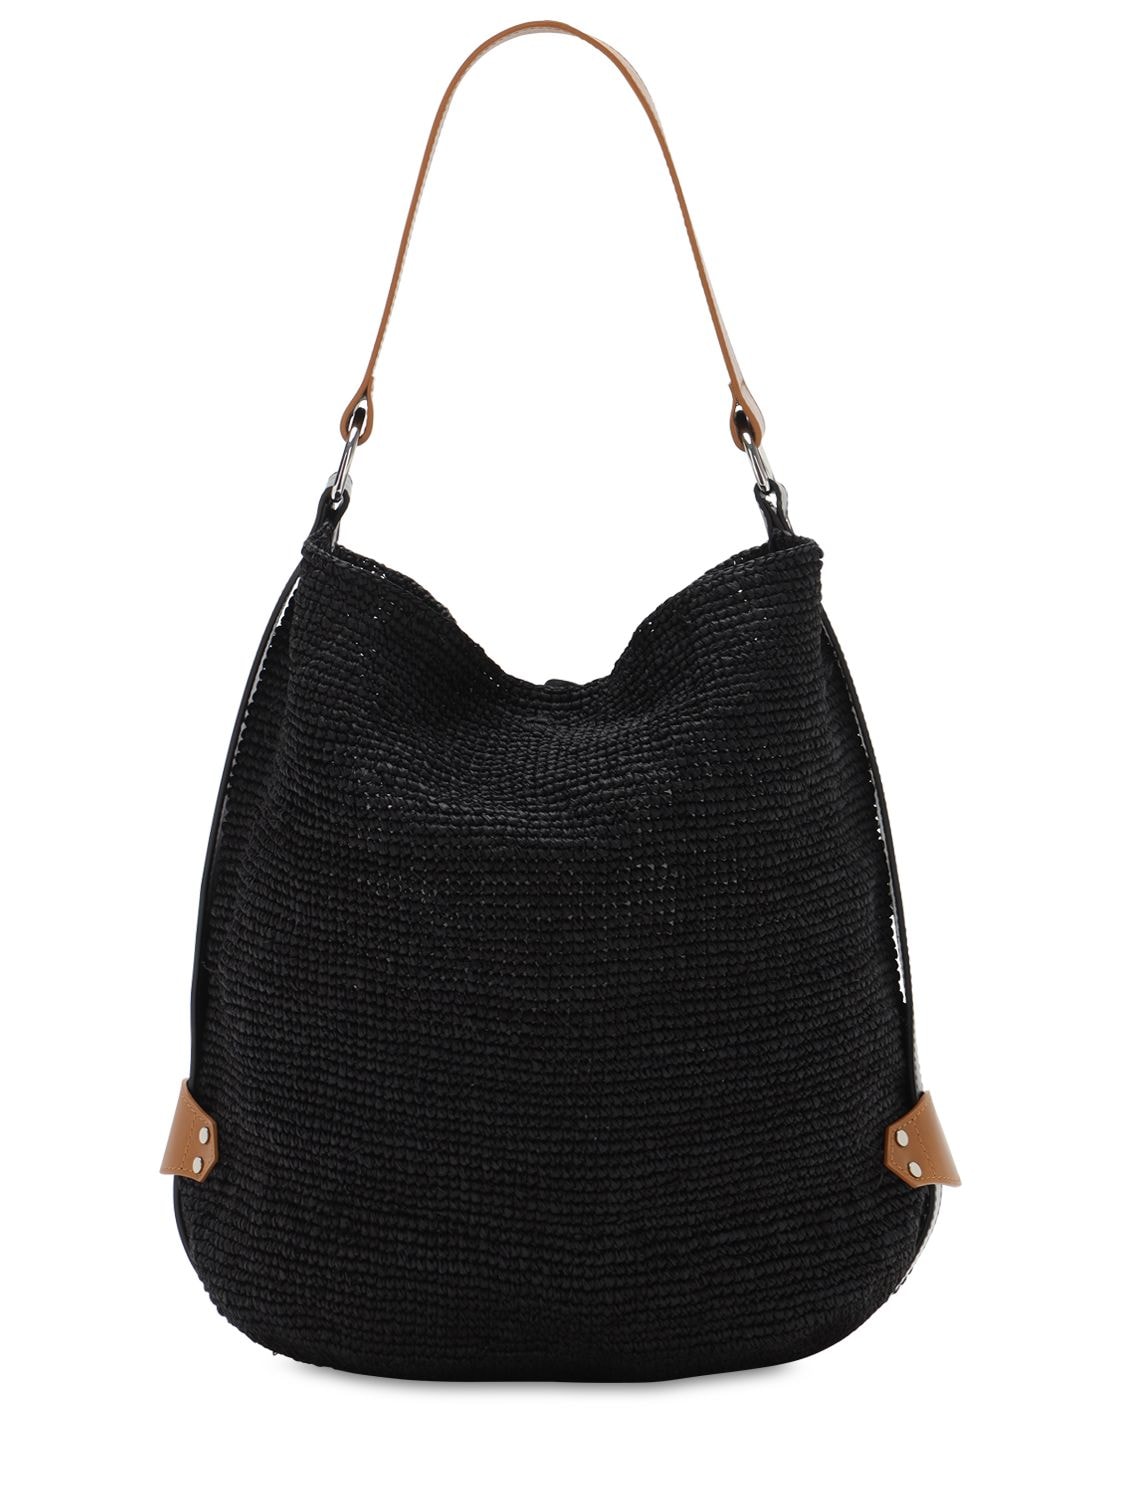 Isabel Marant Bayia Leather-trimmed Woven Raffia Bucket Bag in Gray